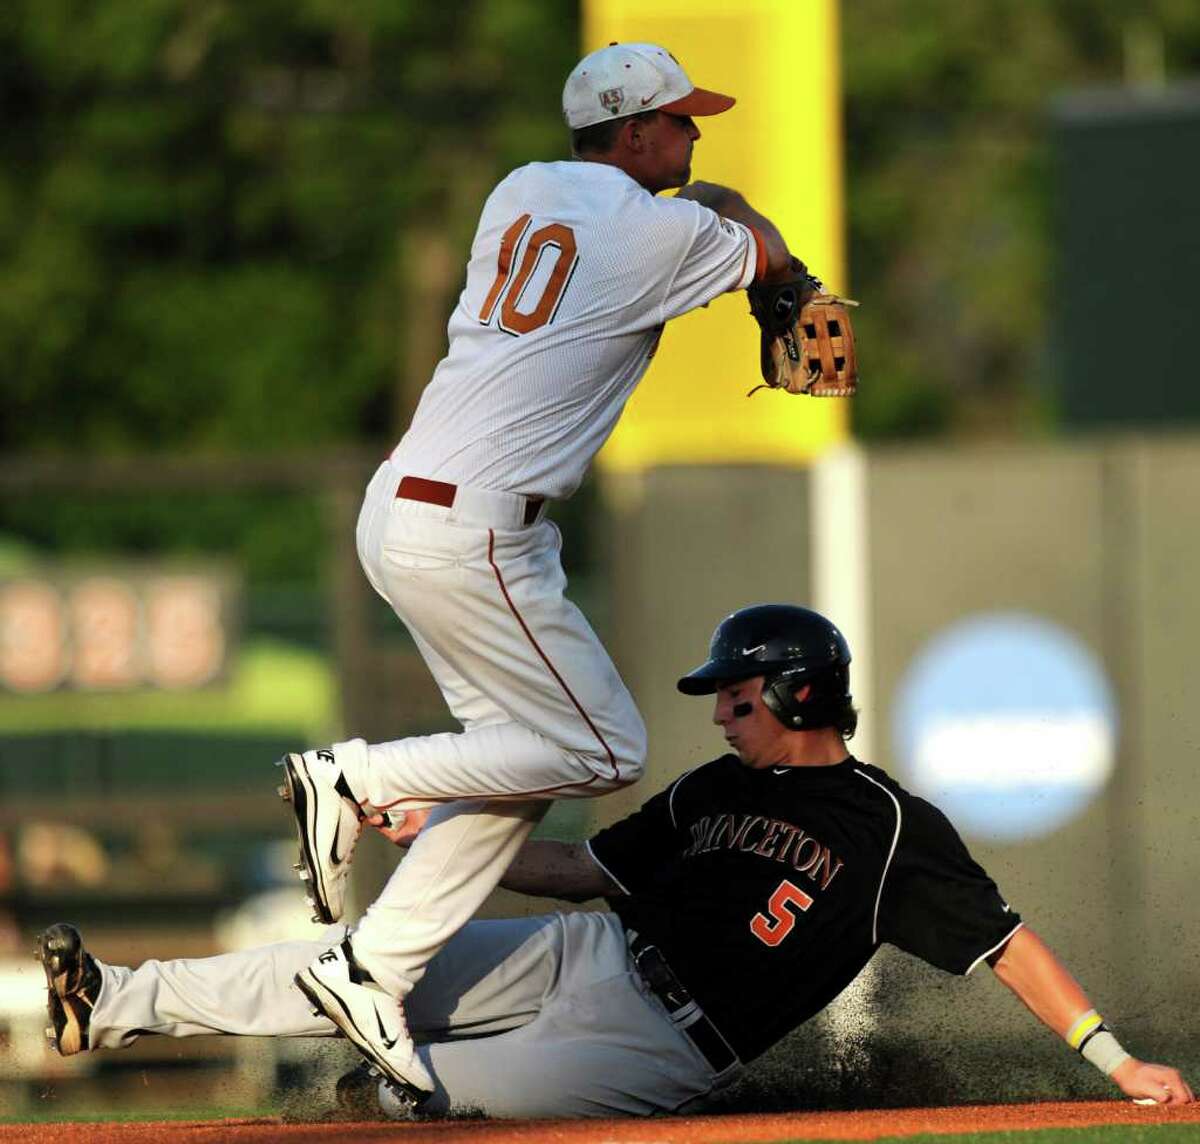 Princeton runner Alex Flink slides safely into second base as as Texas shortstop Brandon Loy throws to first during the NCAA Baseball Austin Regional on Friday, June 3, 2011. BILLY CALZADA / gcalzada@express-news.net